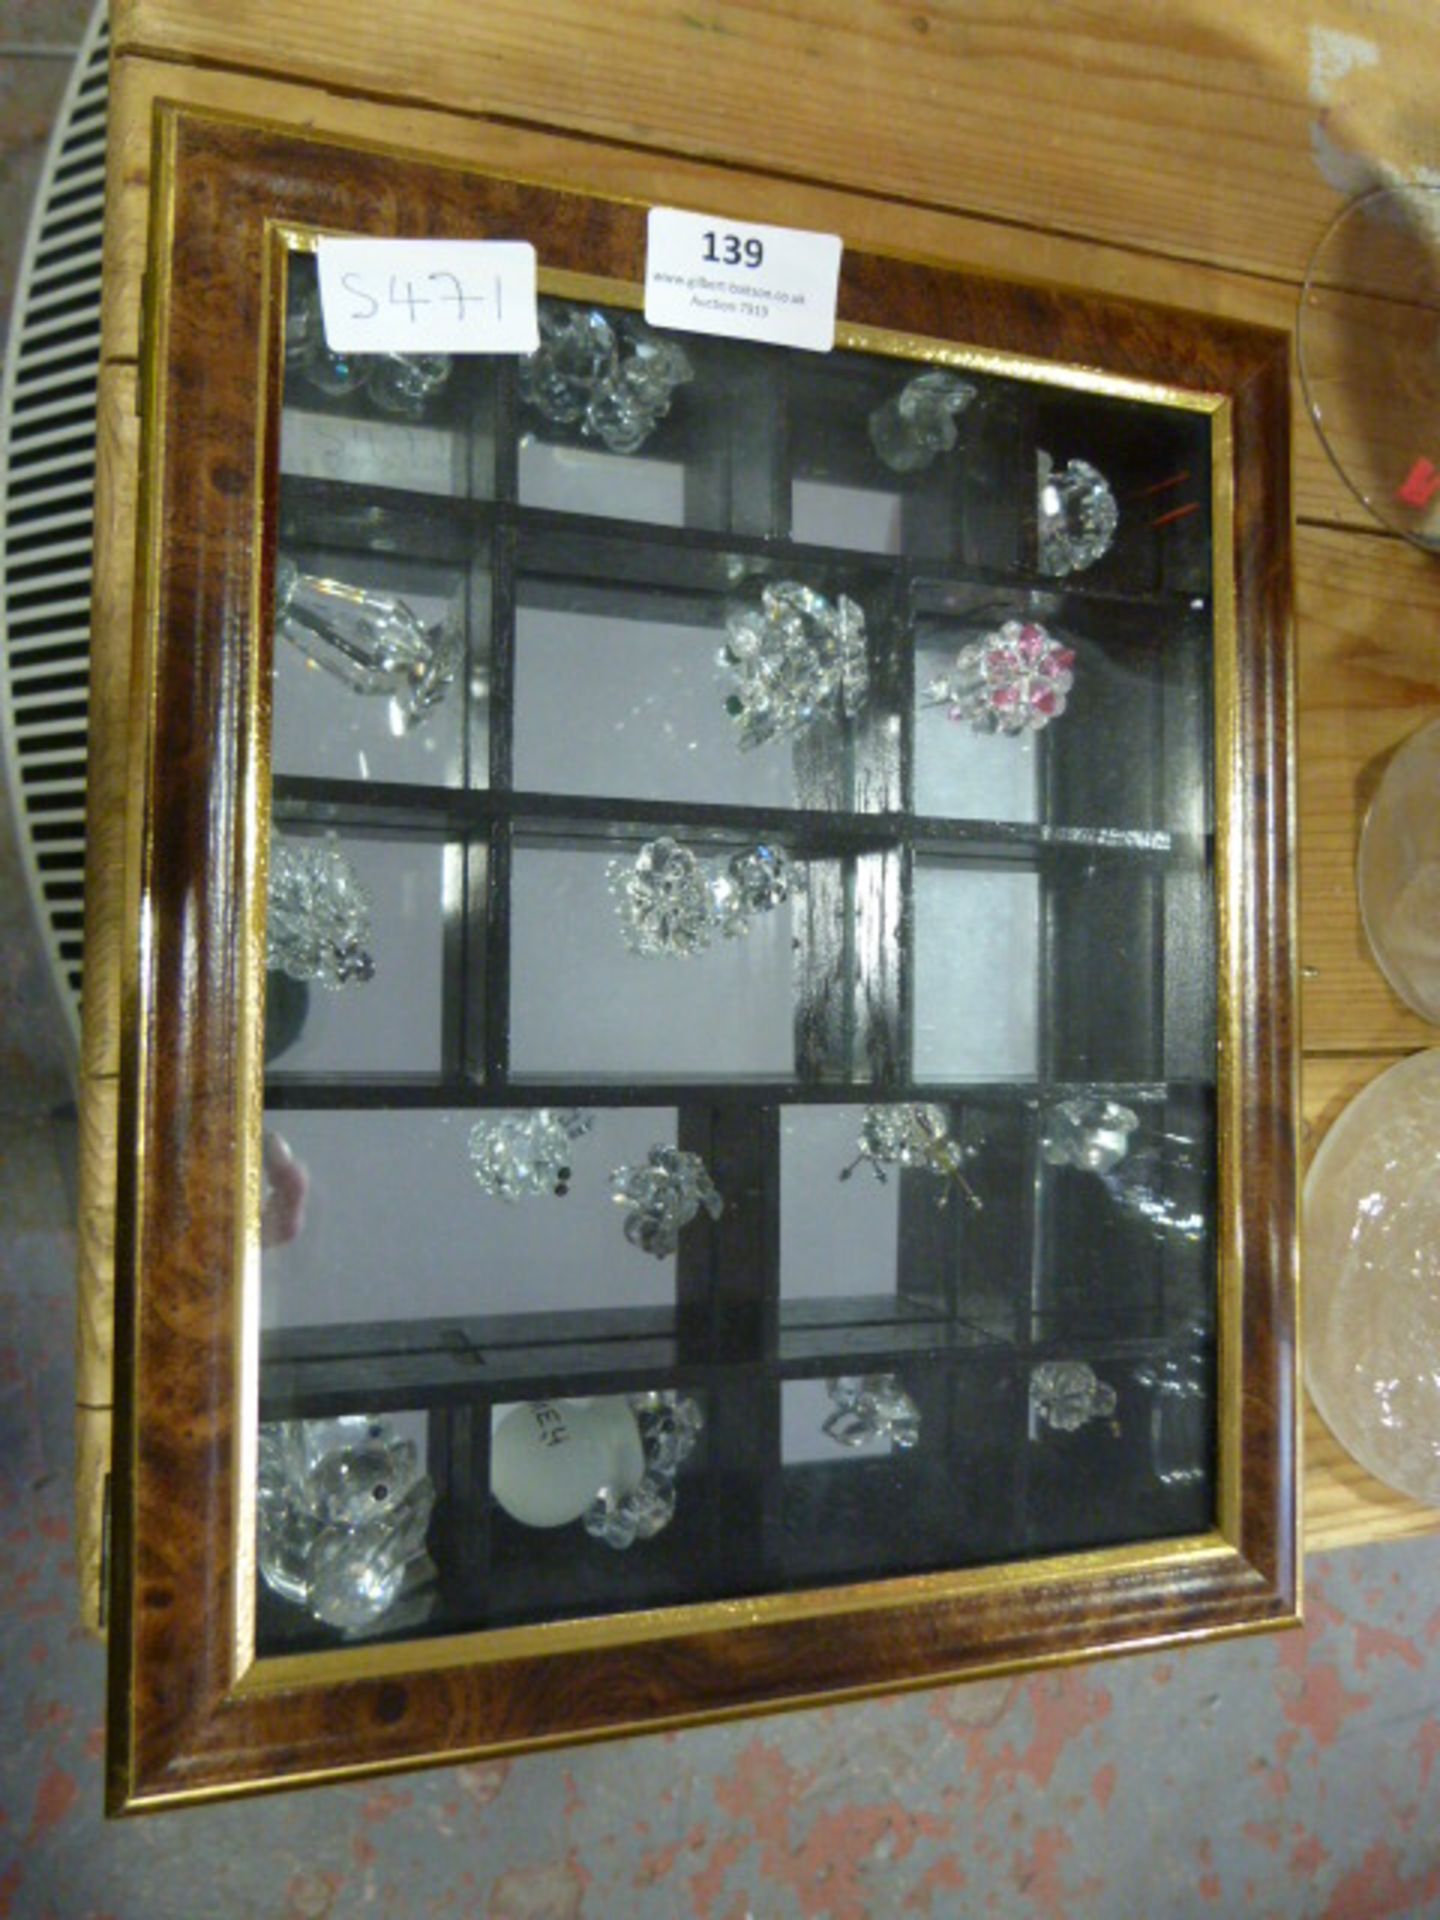 Display Case Containing Crystal Ornaments